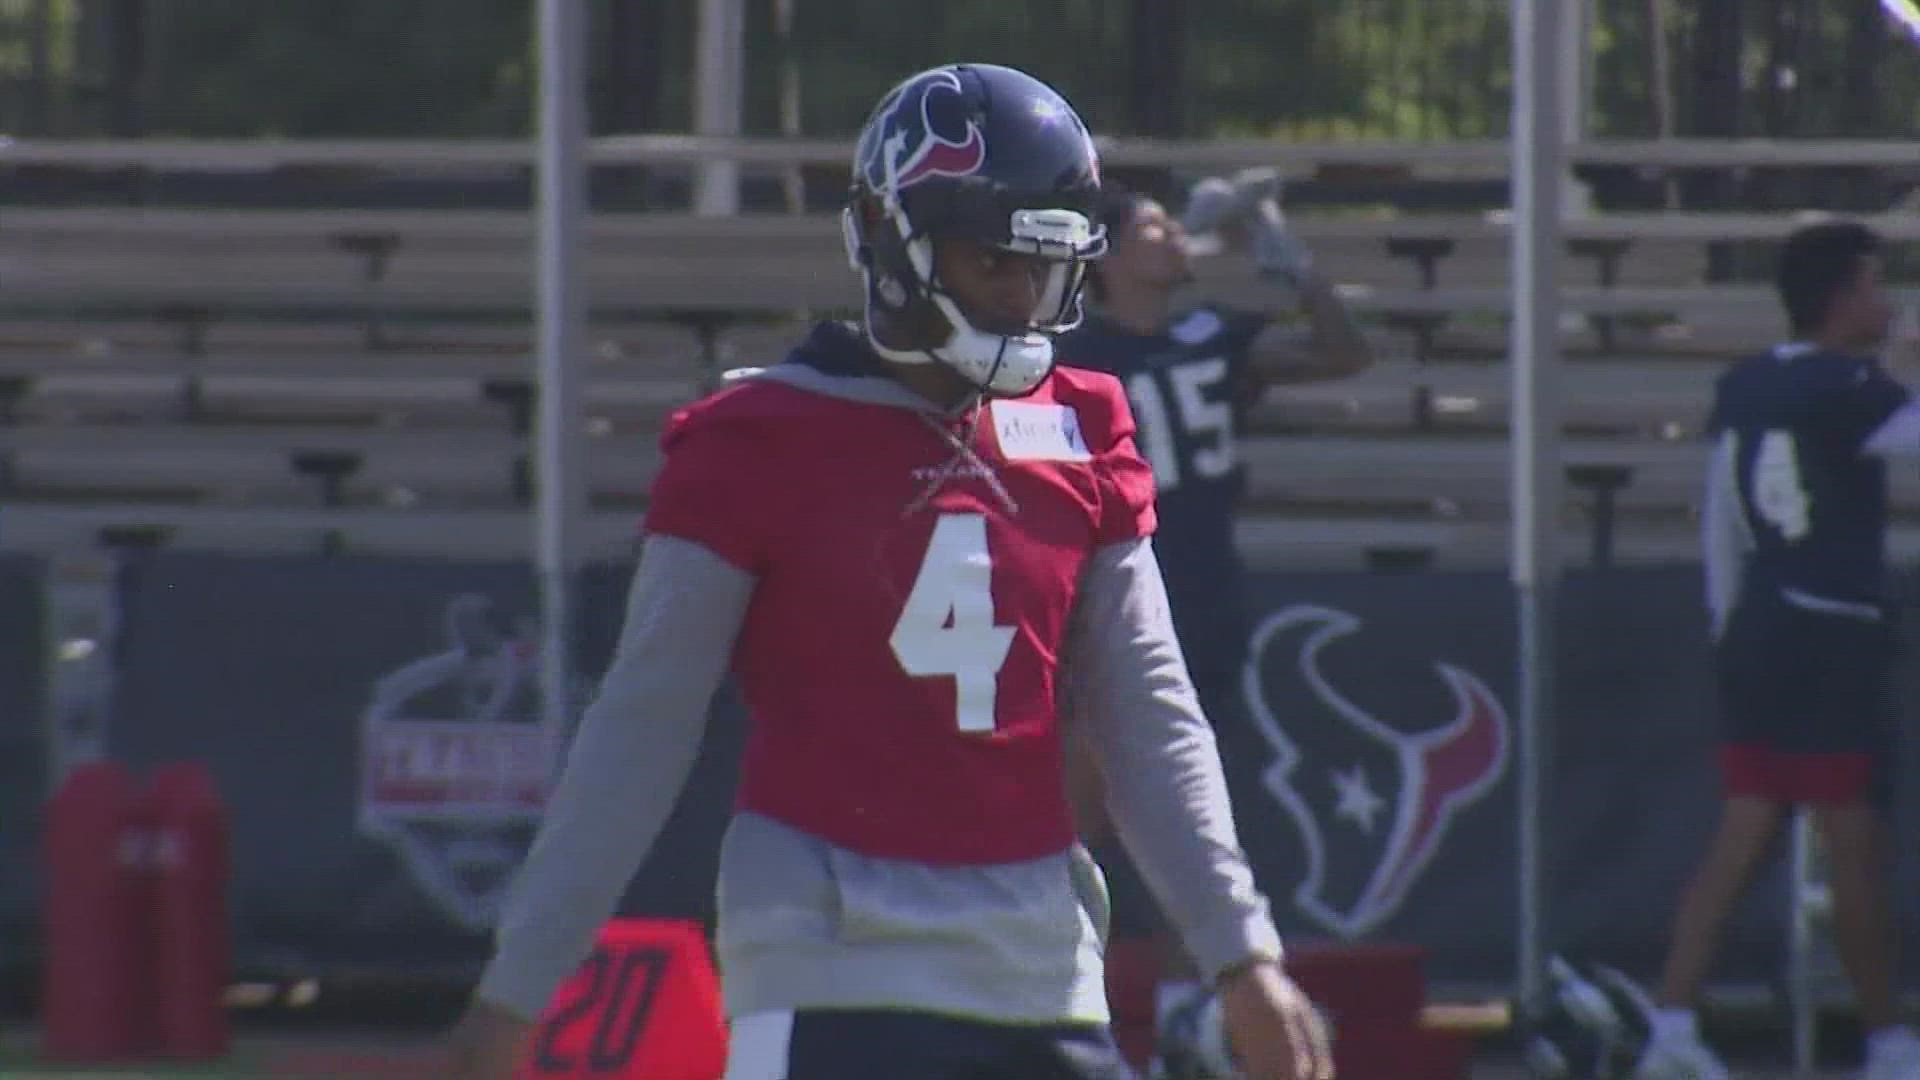 The blockbuster trade between Deshaun Watson and the Texans is complete, but many wonder if the Texans got enough in return.